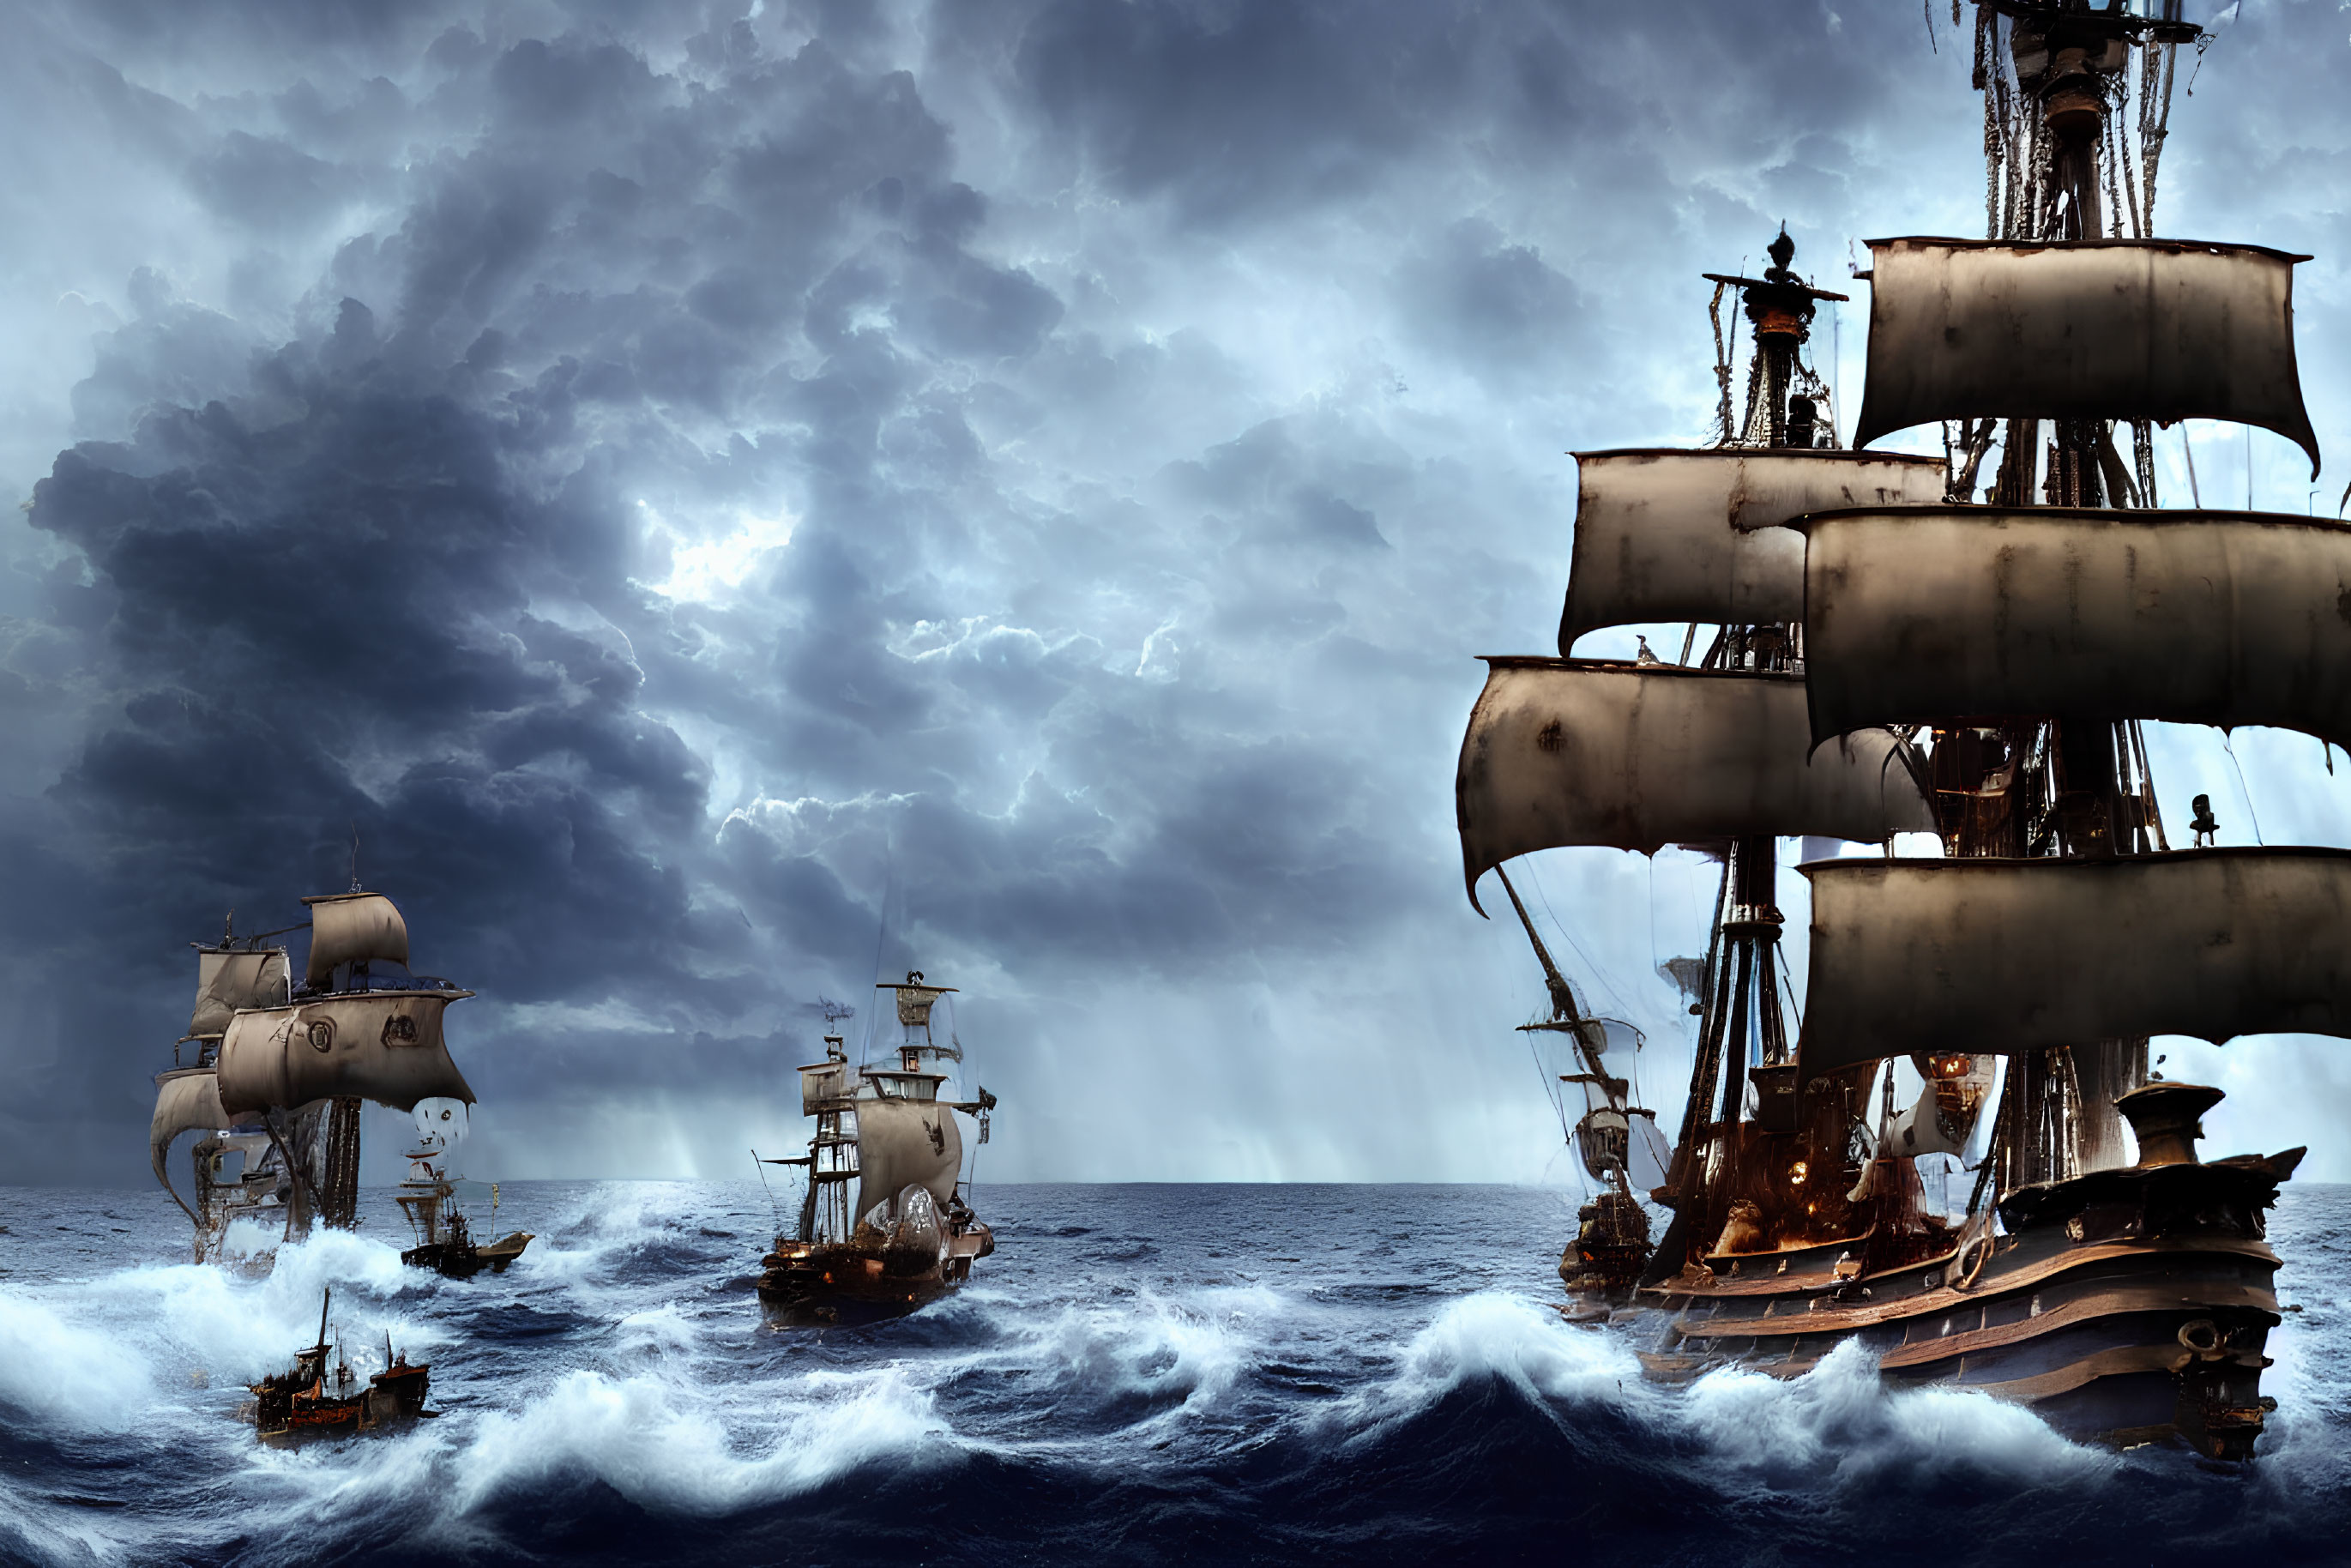 Tall Ships Sailing in Stormy Seas